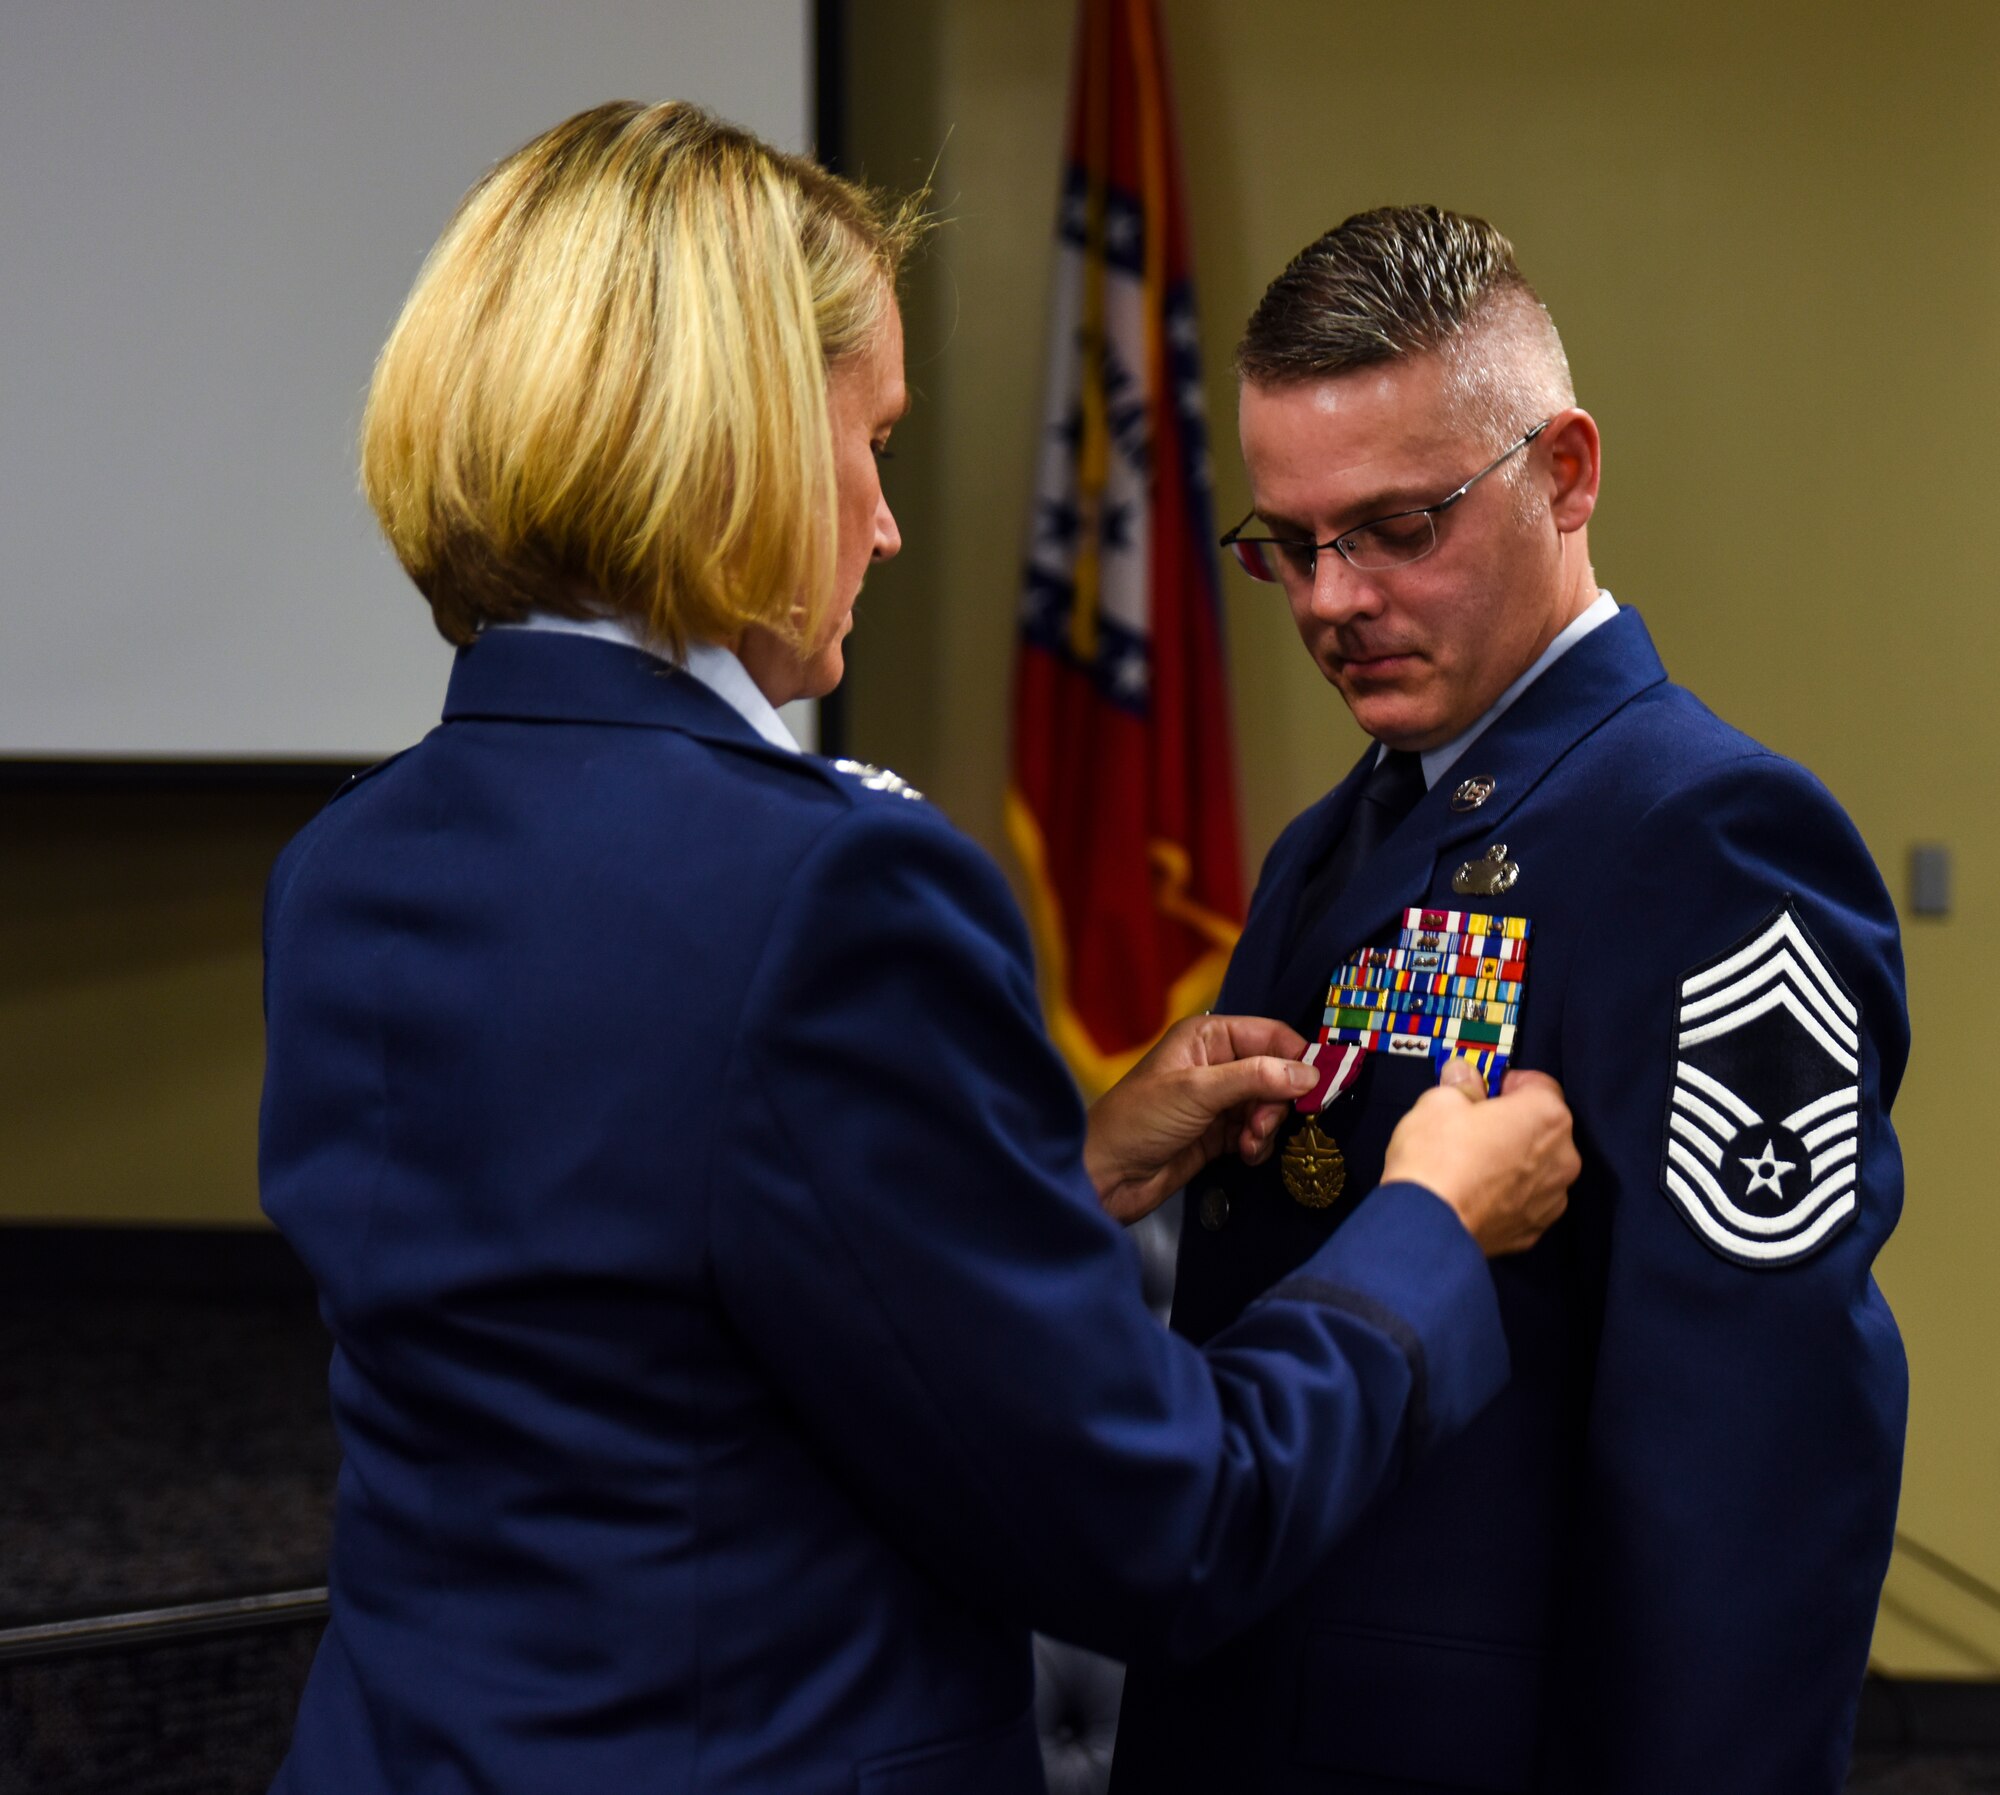 Col. Bobbi Doorenbos, 188th Wing commander, pins the Arkansas Distinguished Service Medal on Chief Master Sgt. Bryan Peters, 188th Force Support Squadron supervisor, Aug. 7, 2016, during Peters’ retirement ceremony at Ebbing Air National Guard Base, Fort Smith, Ark. Peters has served in the Air National Guard for over 24 years, all with the 188th Wing. (U.S. Air National Guard photo by Senior Airman Cody Martin)